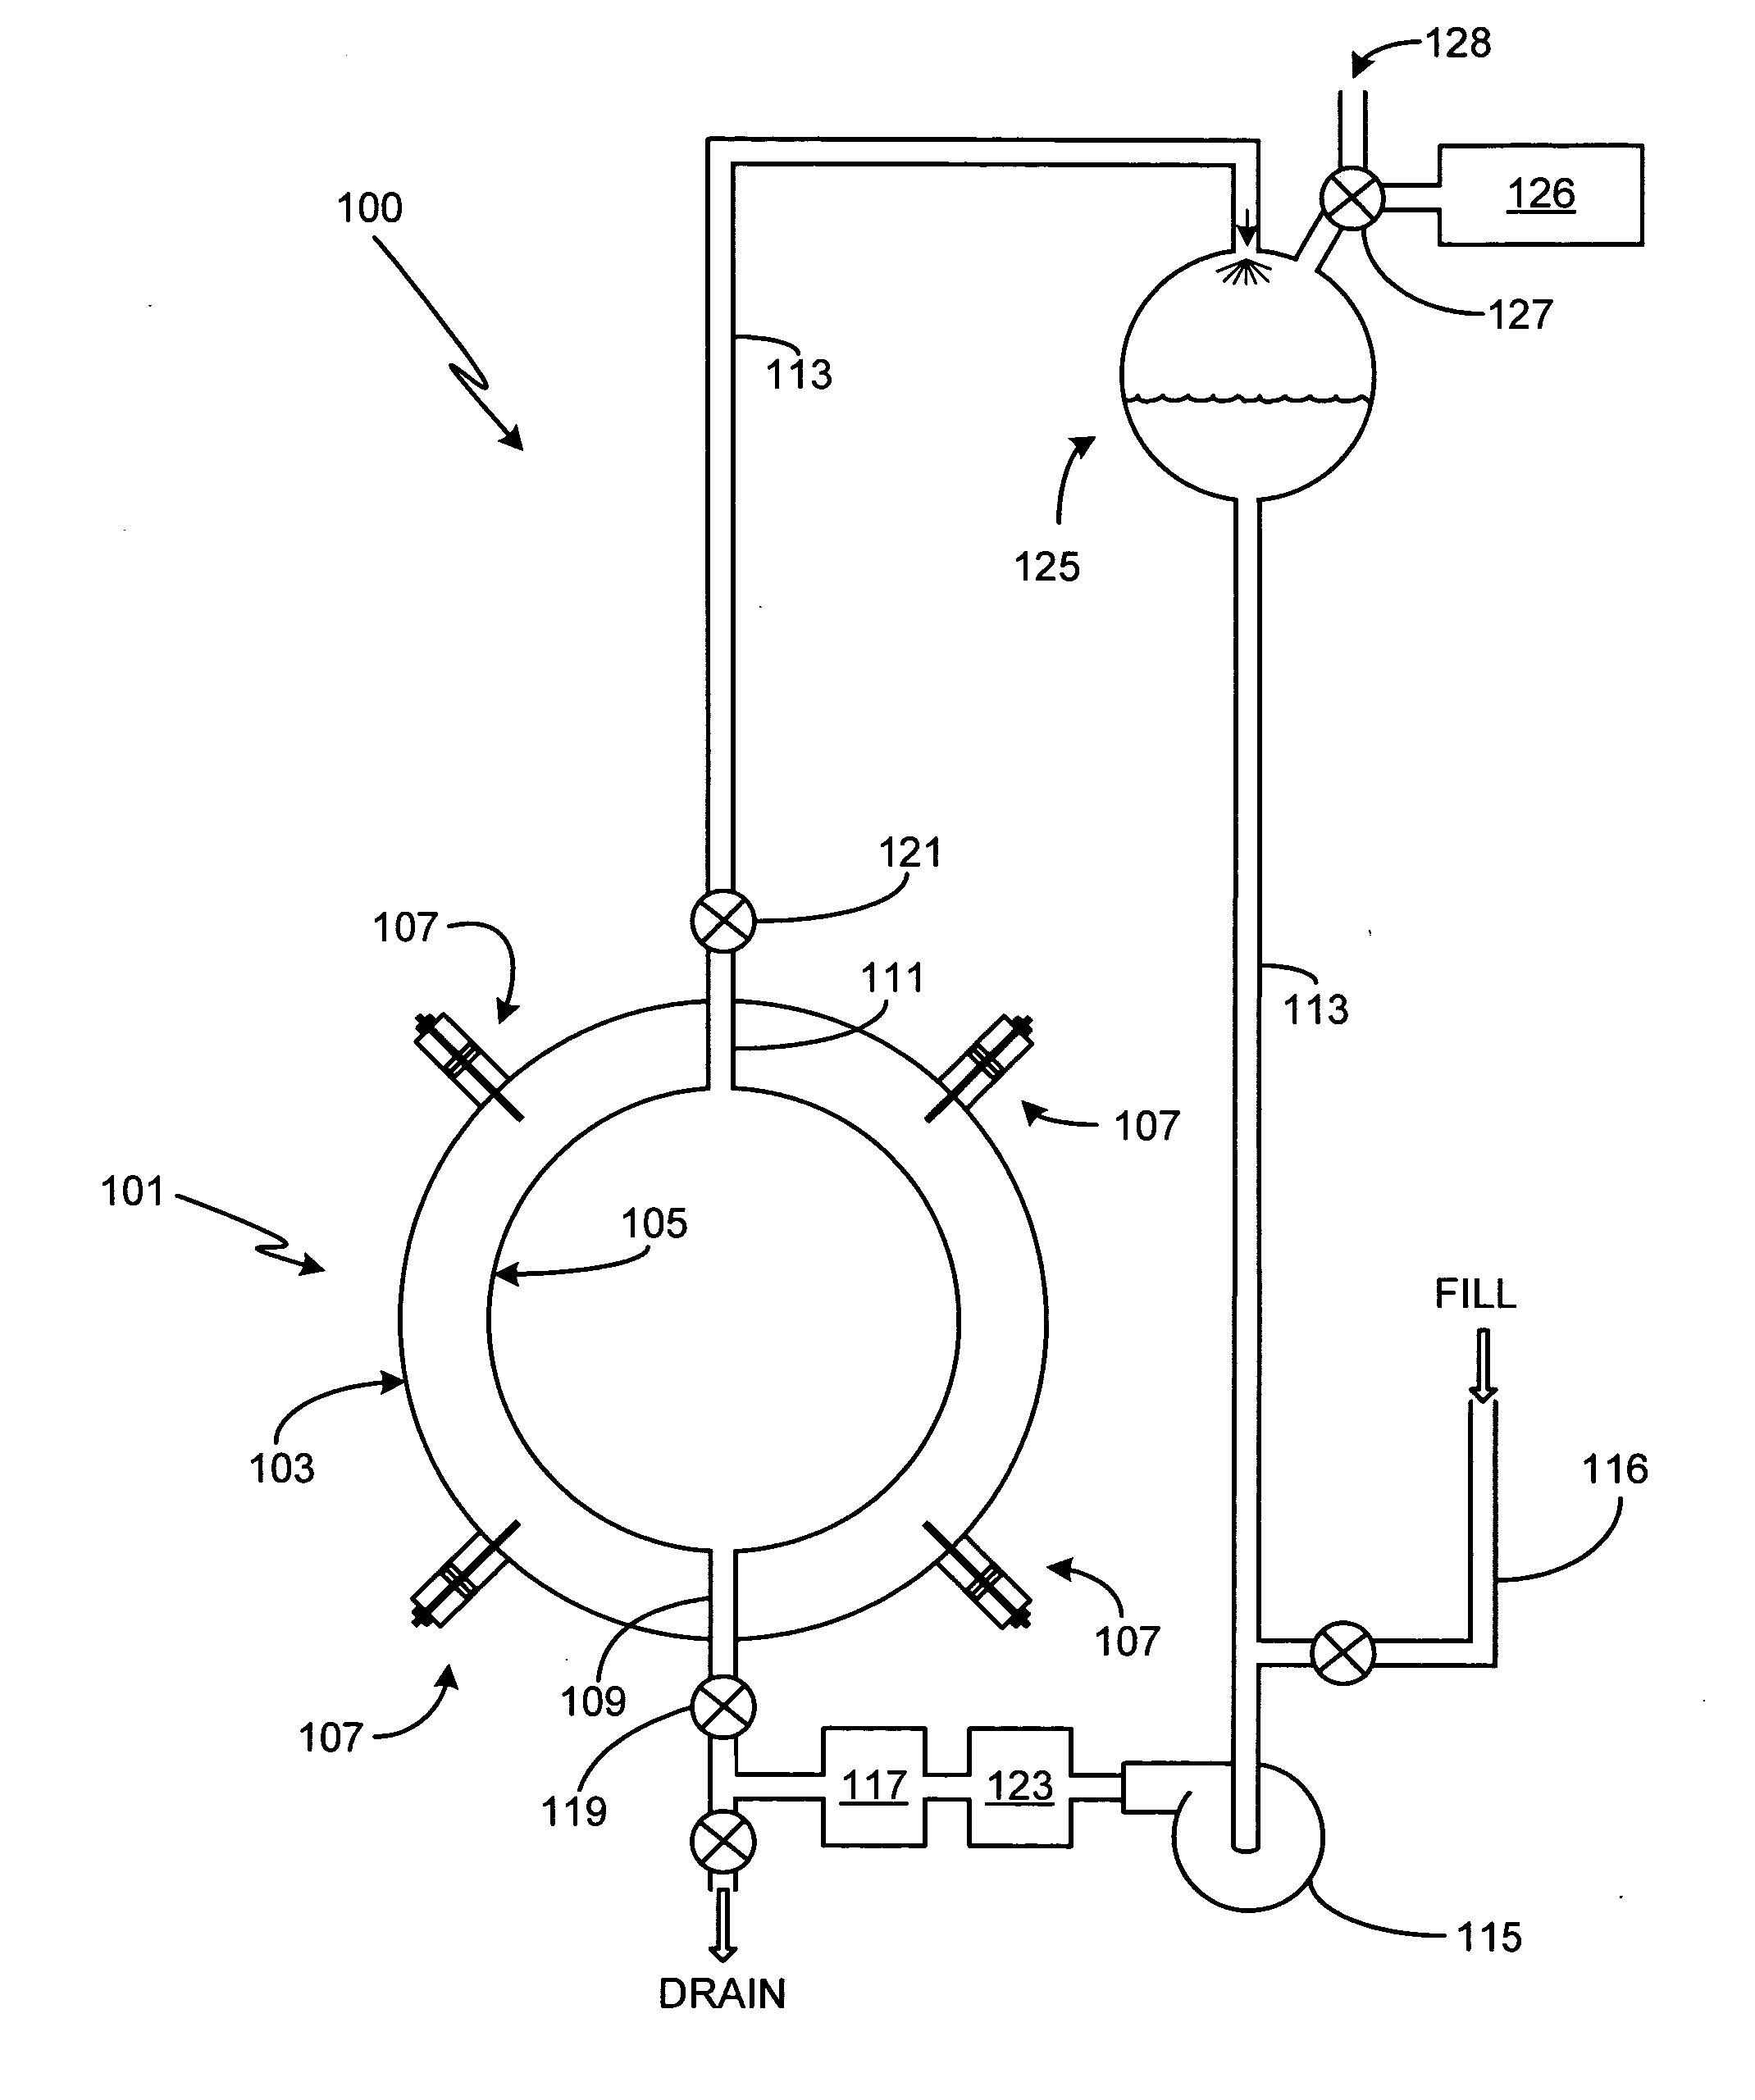 Heat exchange system for a cavitation chamber